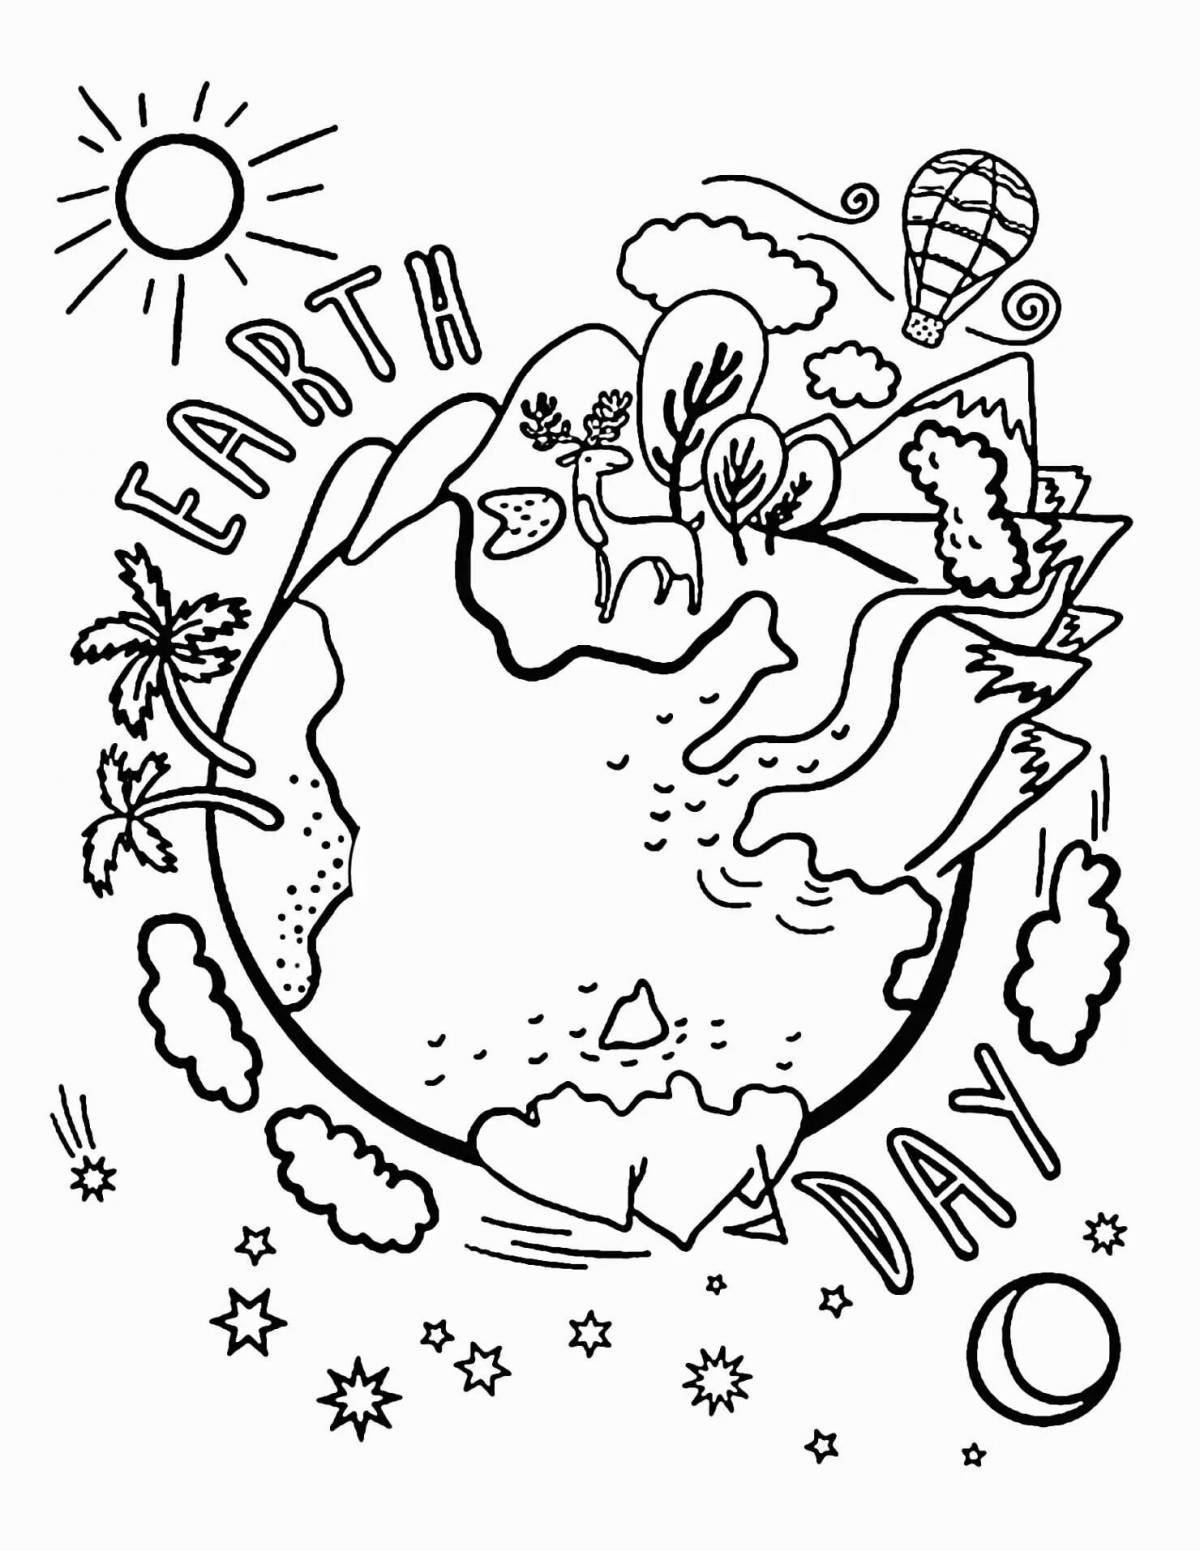 Shining caring for nature coloring pages for kids